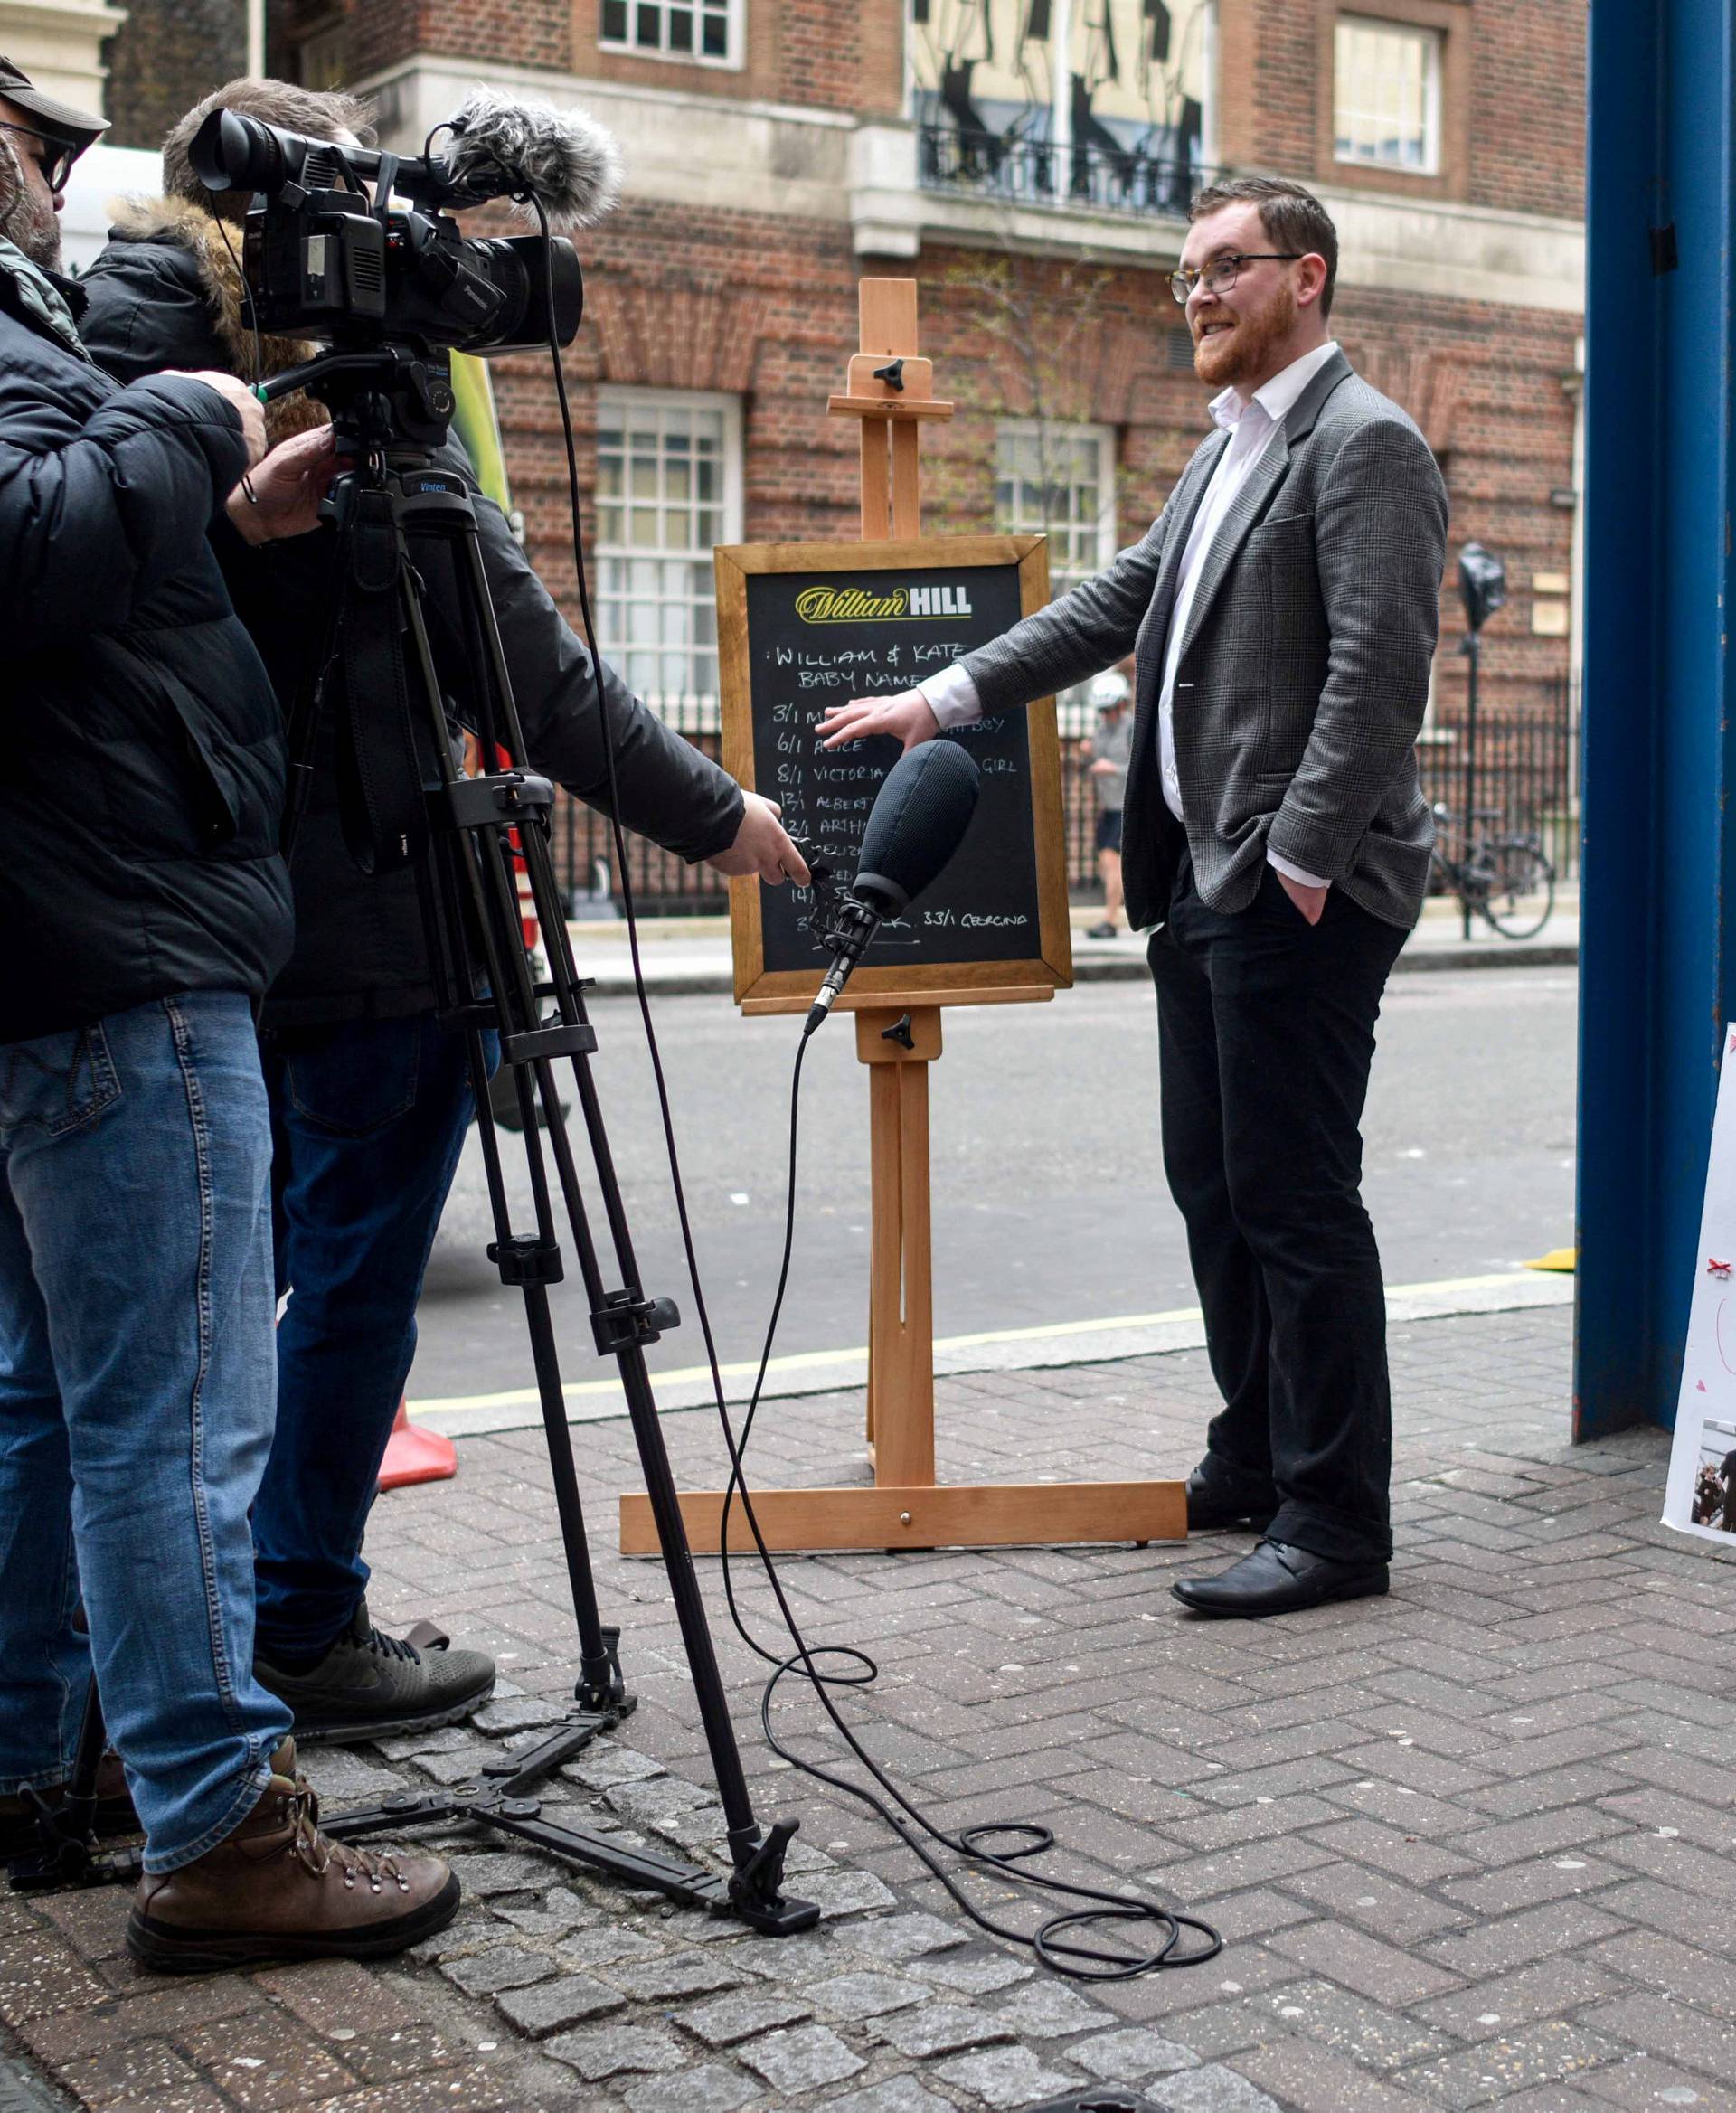 A spokesperson from the bookmaker William Hill, is interviewed by a televsion crew as he writes the names and betting odds for the third royal baby of Britain's Prince William and Catherine, Duchess of Cambridge, on a board outside St Mary's Hospital